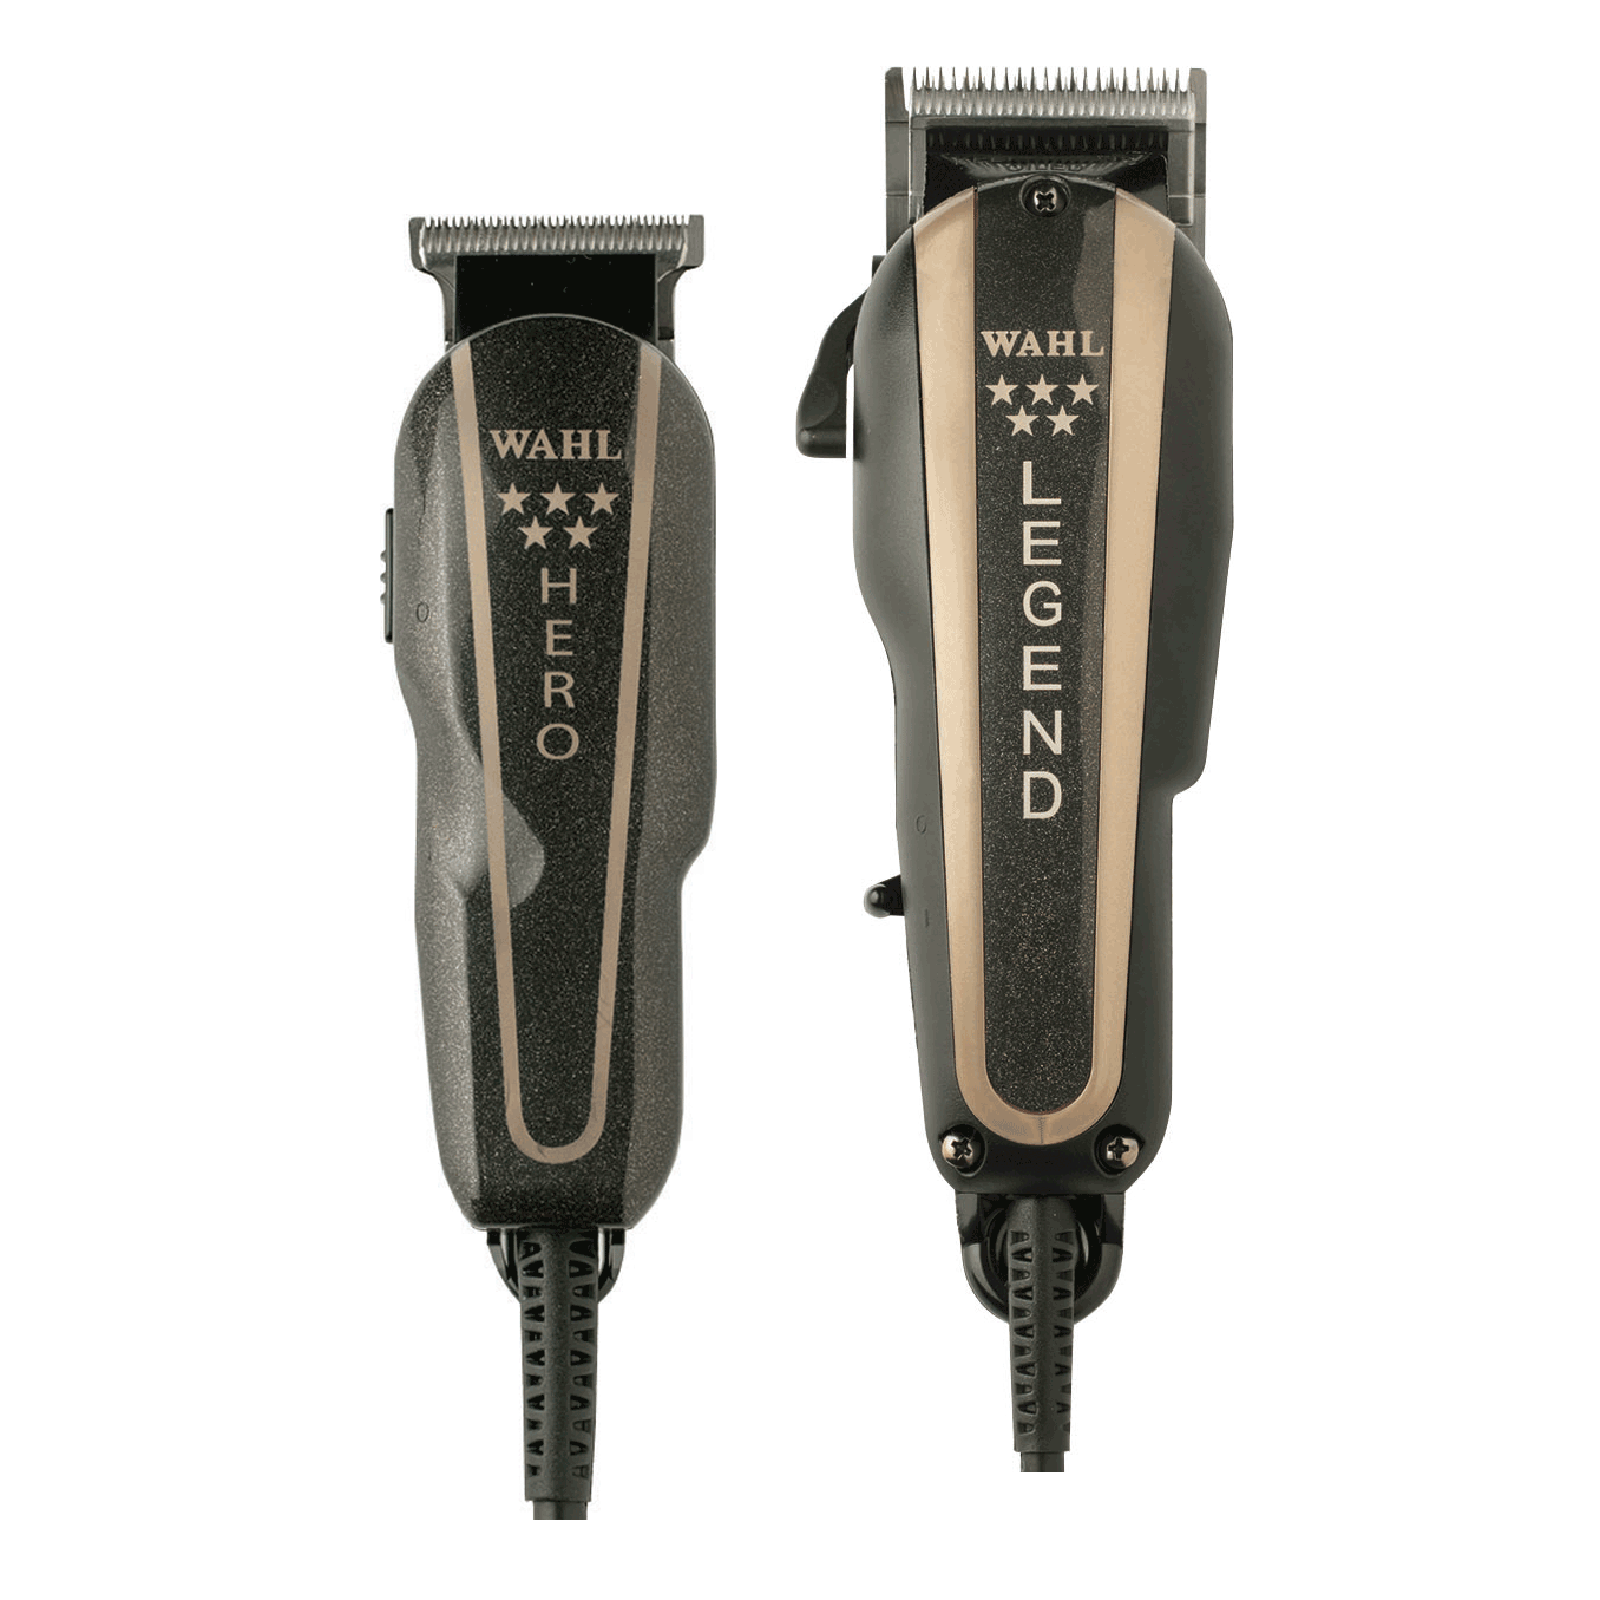 wahl t styler gold review